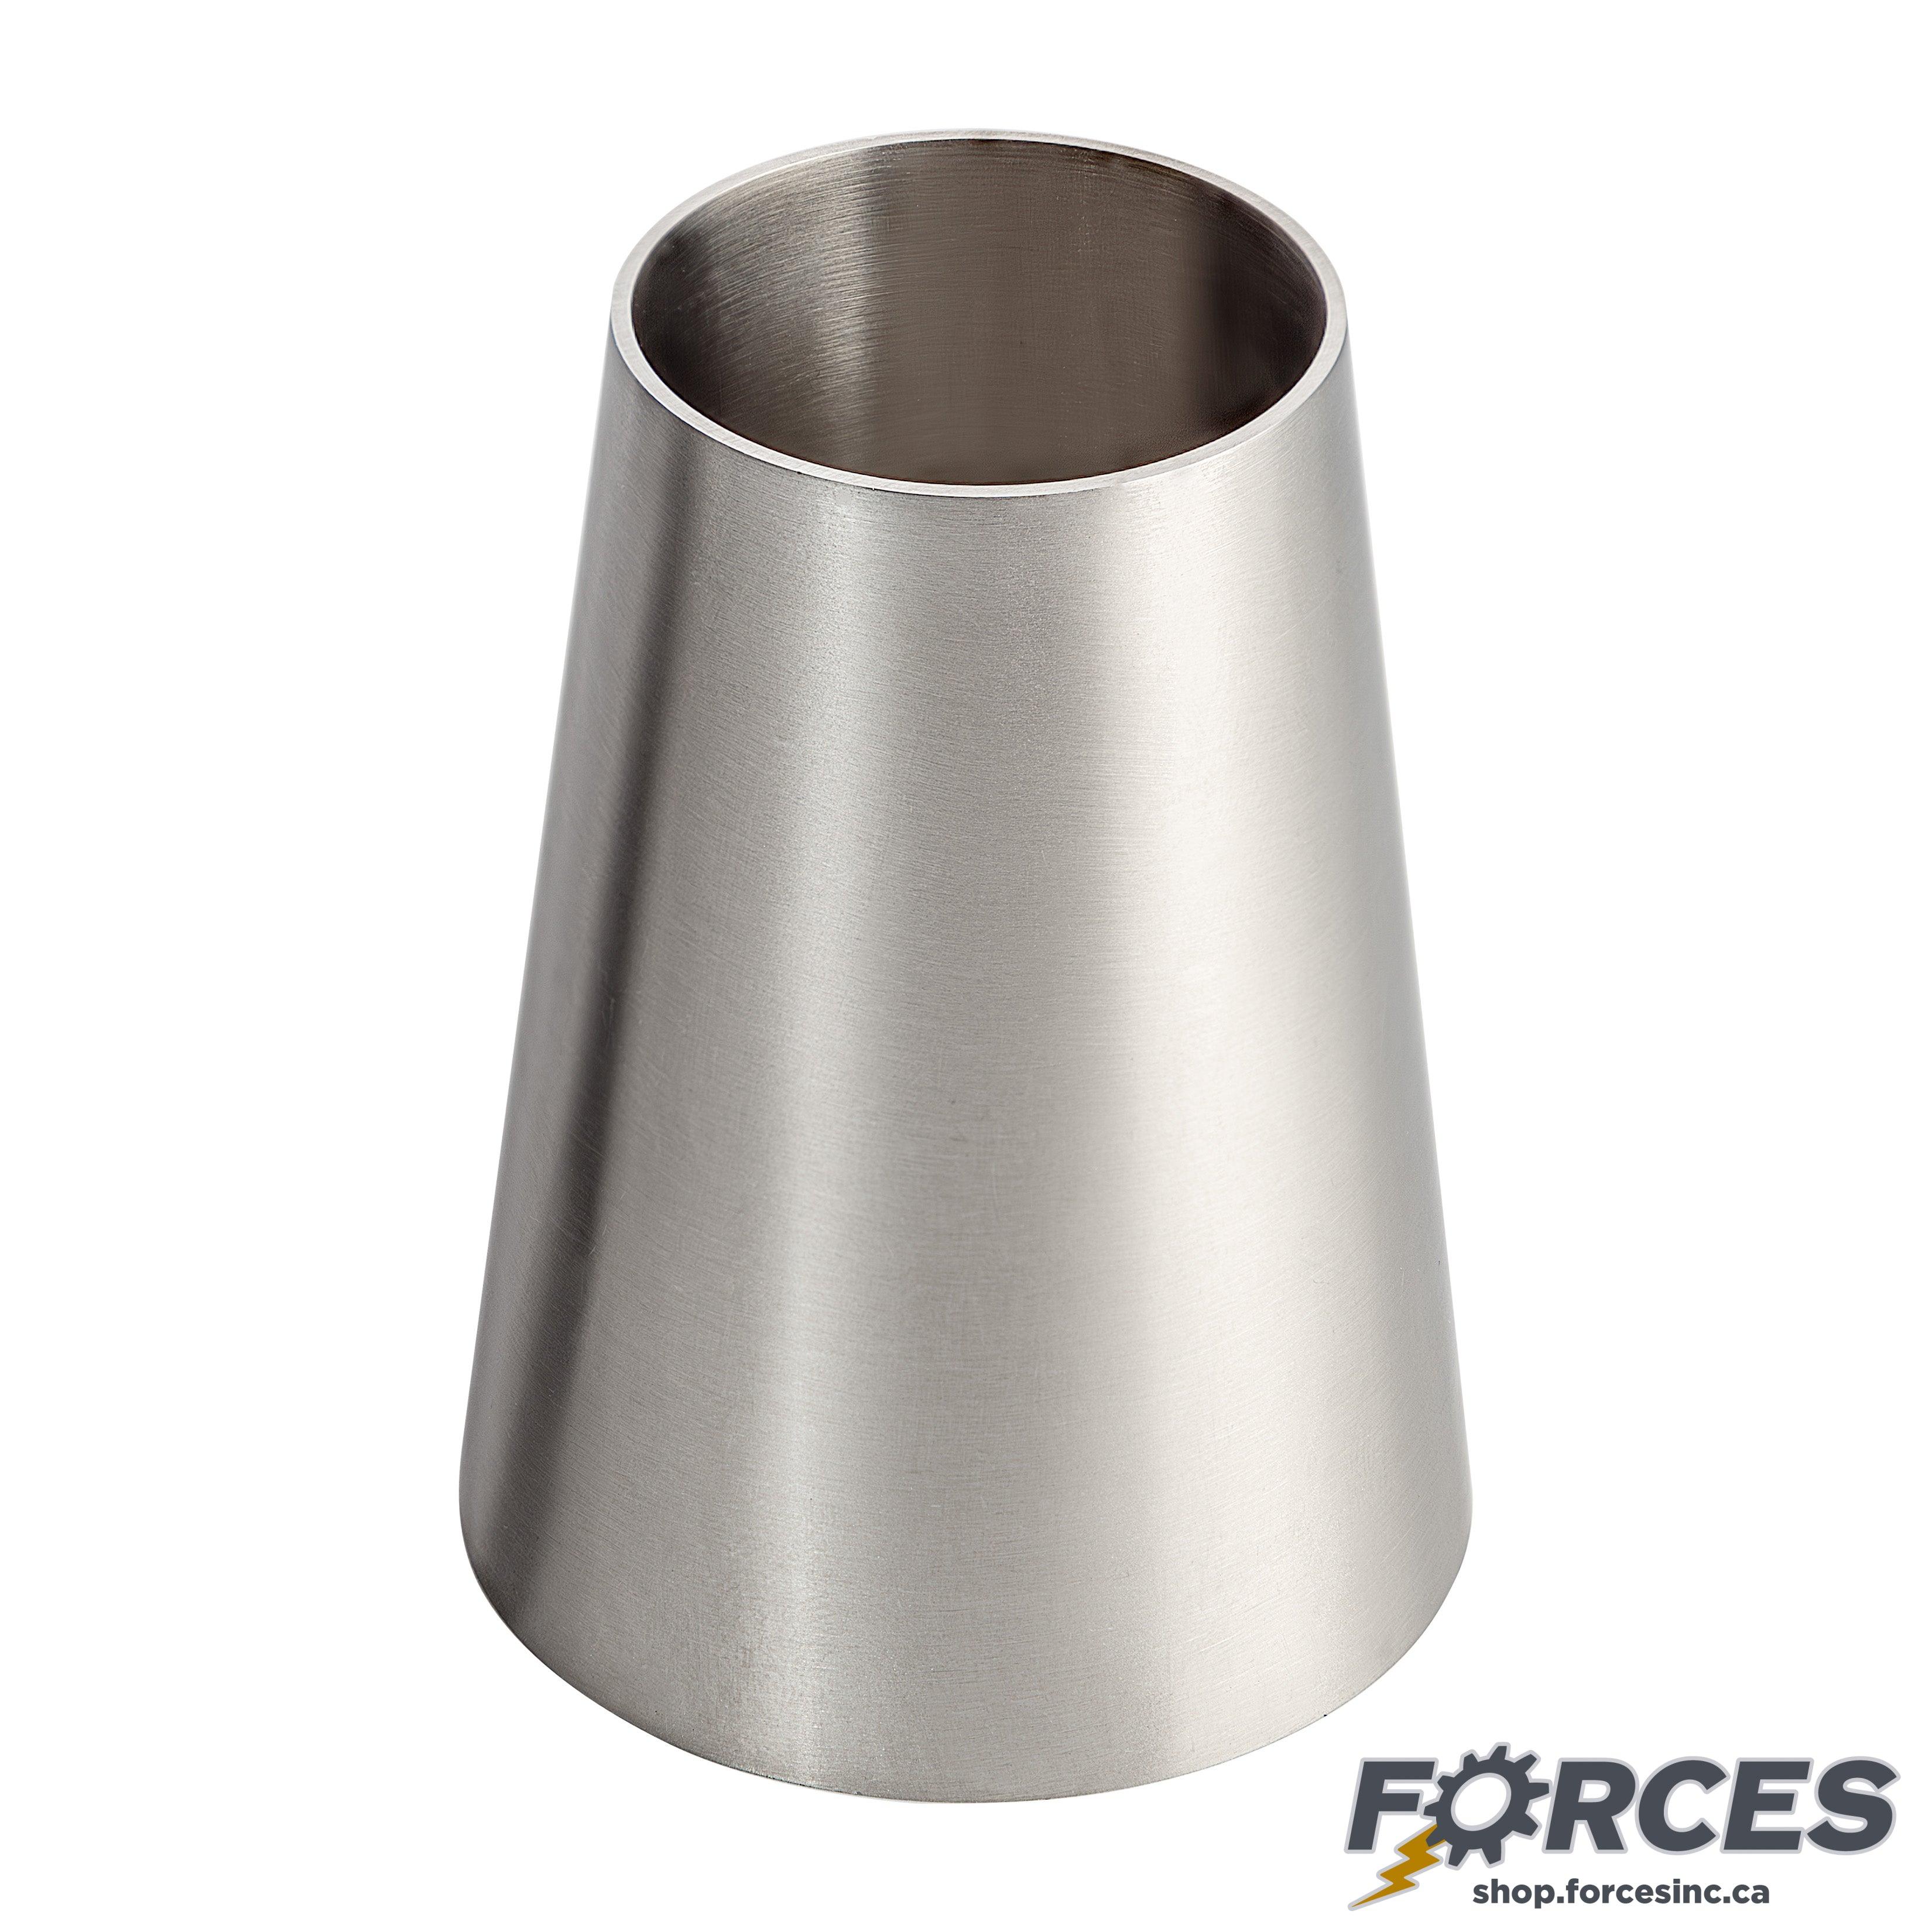 2-1/2" x 1-1/2" Butt Weld Concentric Reducer - Stainless Steel 316 - Forces Inc